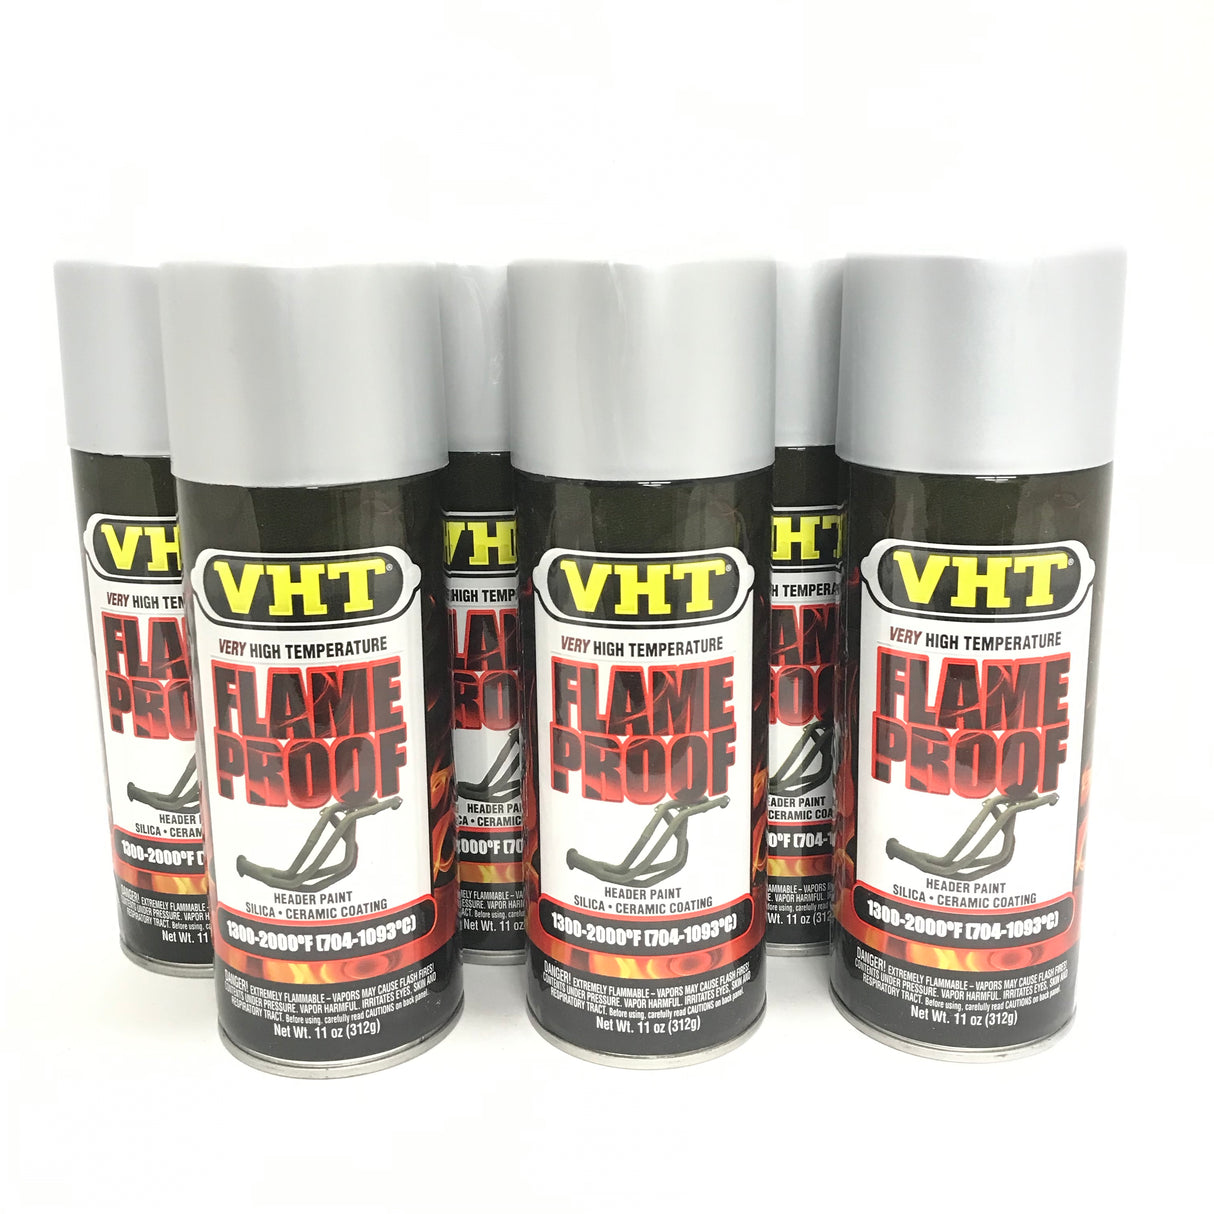 VHT SP106-6 PACK FLAT SILVER High Temperature Flame Proof Header Paint - 11 oz